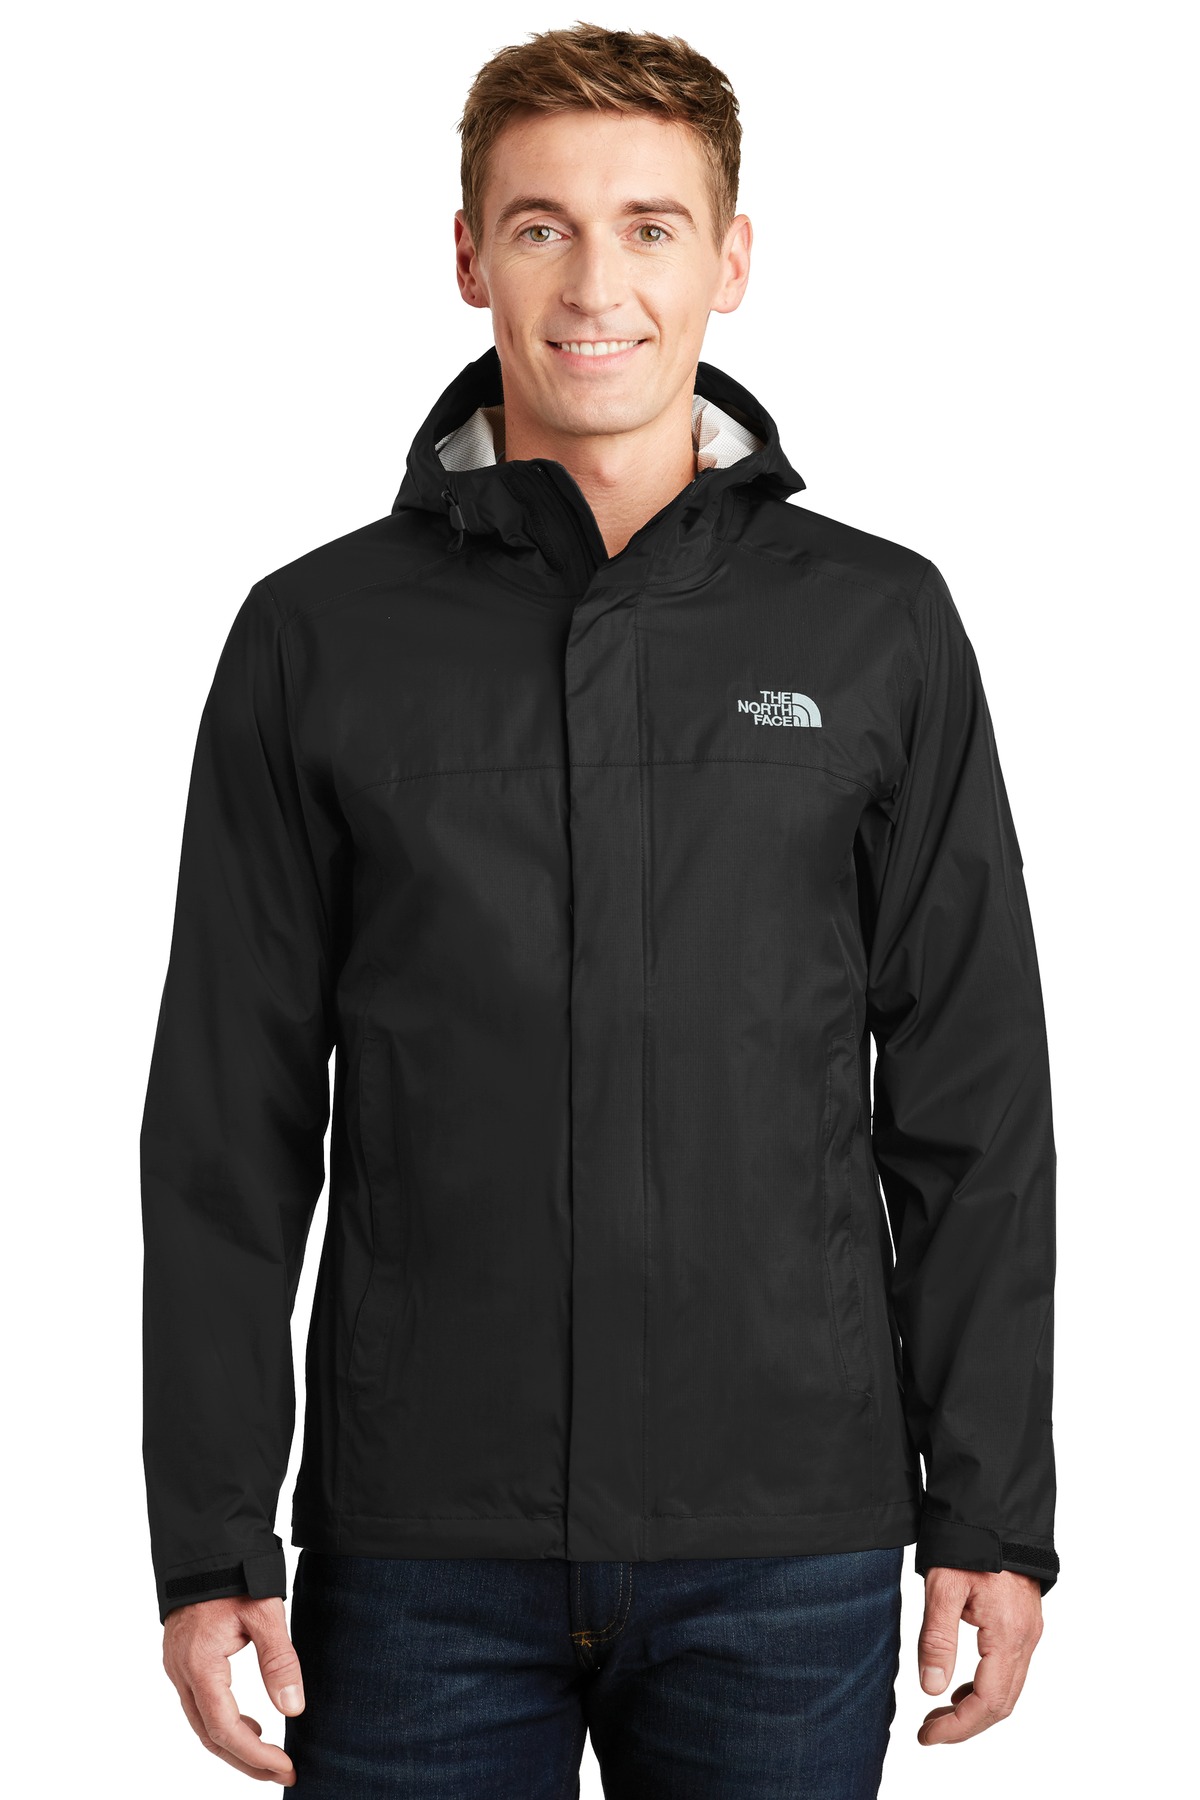 The North Face DryVent Rain Jacket-The North Face